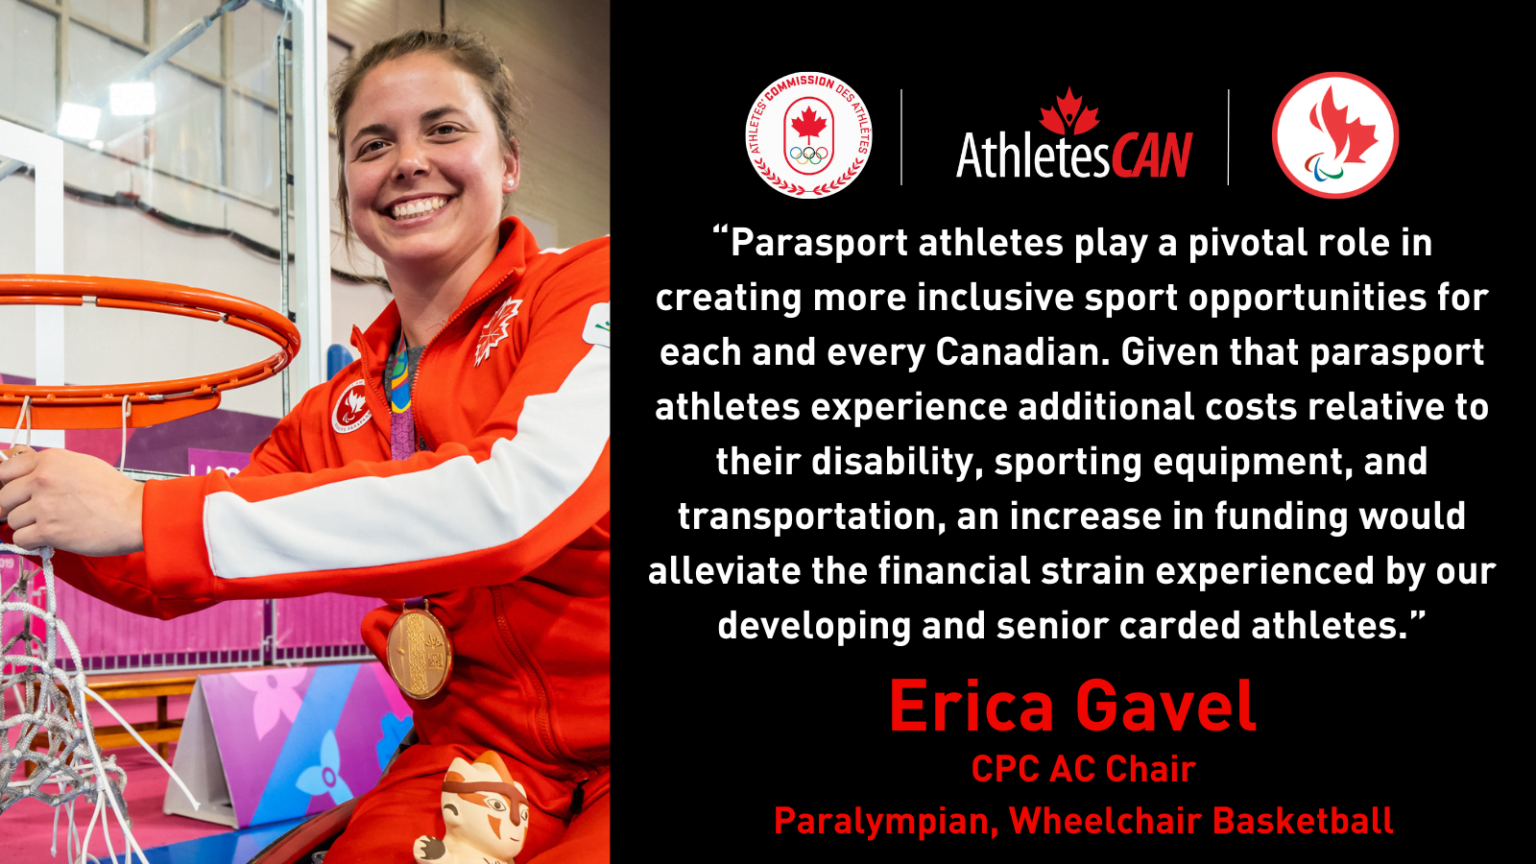 “Parasport athletes play a pivotal role in creating more inclusive sport opportunities for each and every Canadian,” said CPC AC Chair and wheelchair basketball Paralympian Erica Gavel. “Given that para-sport athletes experience additional costs relative to their disability, sporting equipment, and transportation, an increase in funding would alleviate the financial strain experienced by our developing and senior carded athletes.”